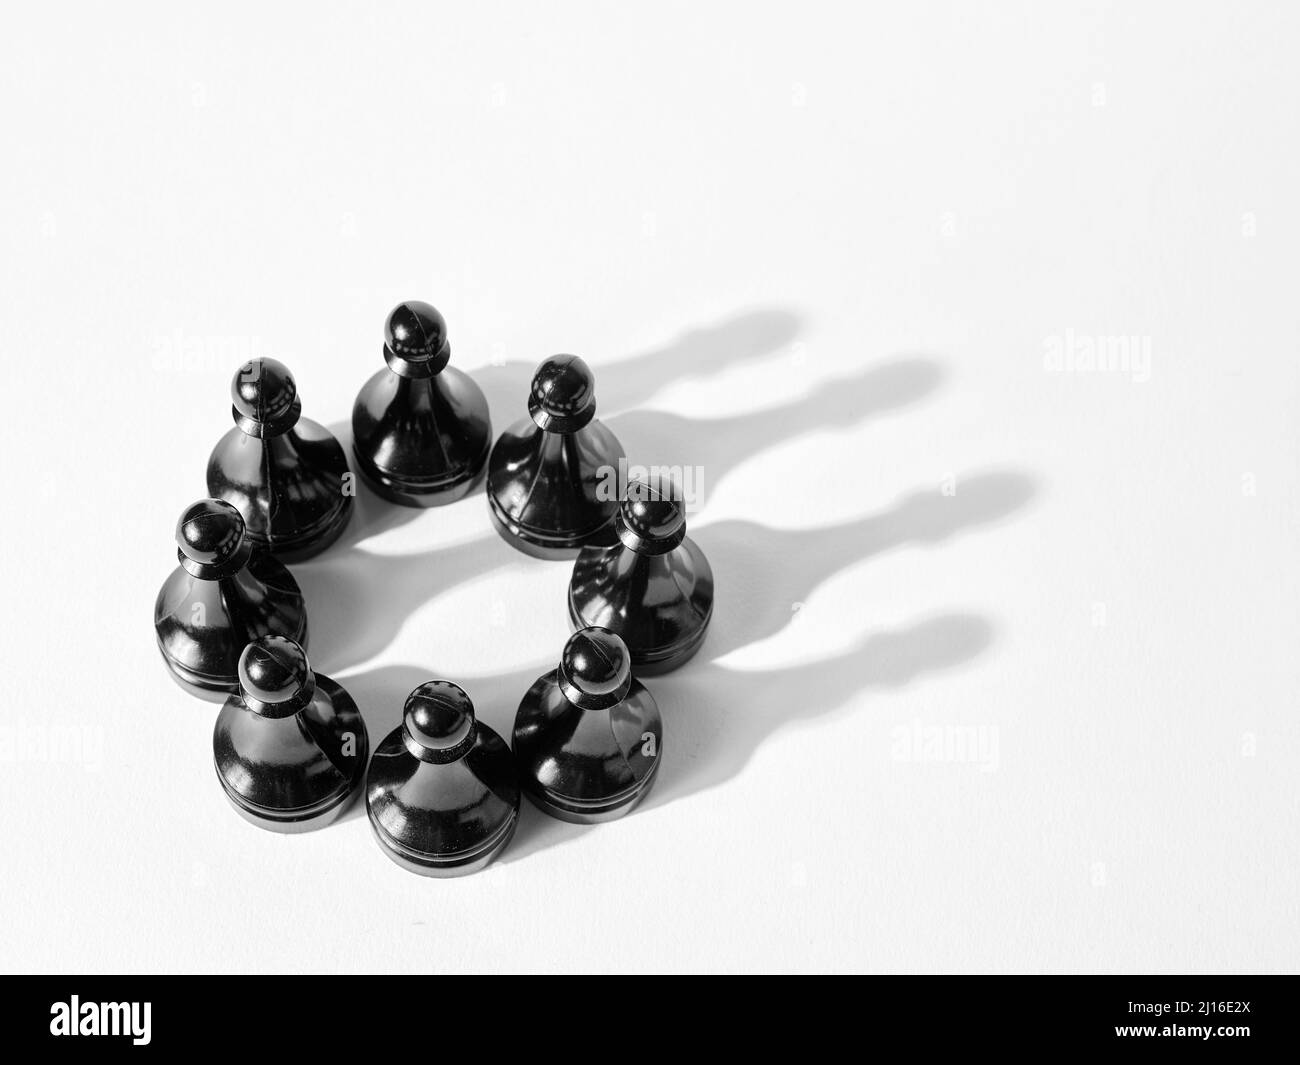 Chess pawns organized together and forming a crown shadow. Business teamwork leadership and synergy concept. Stock Photo